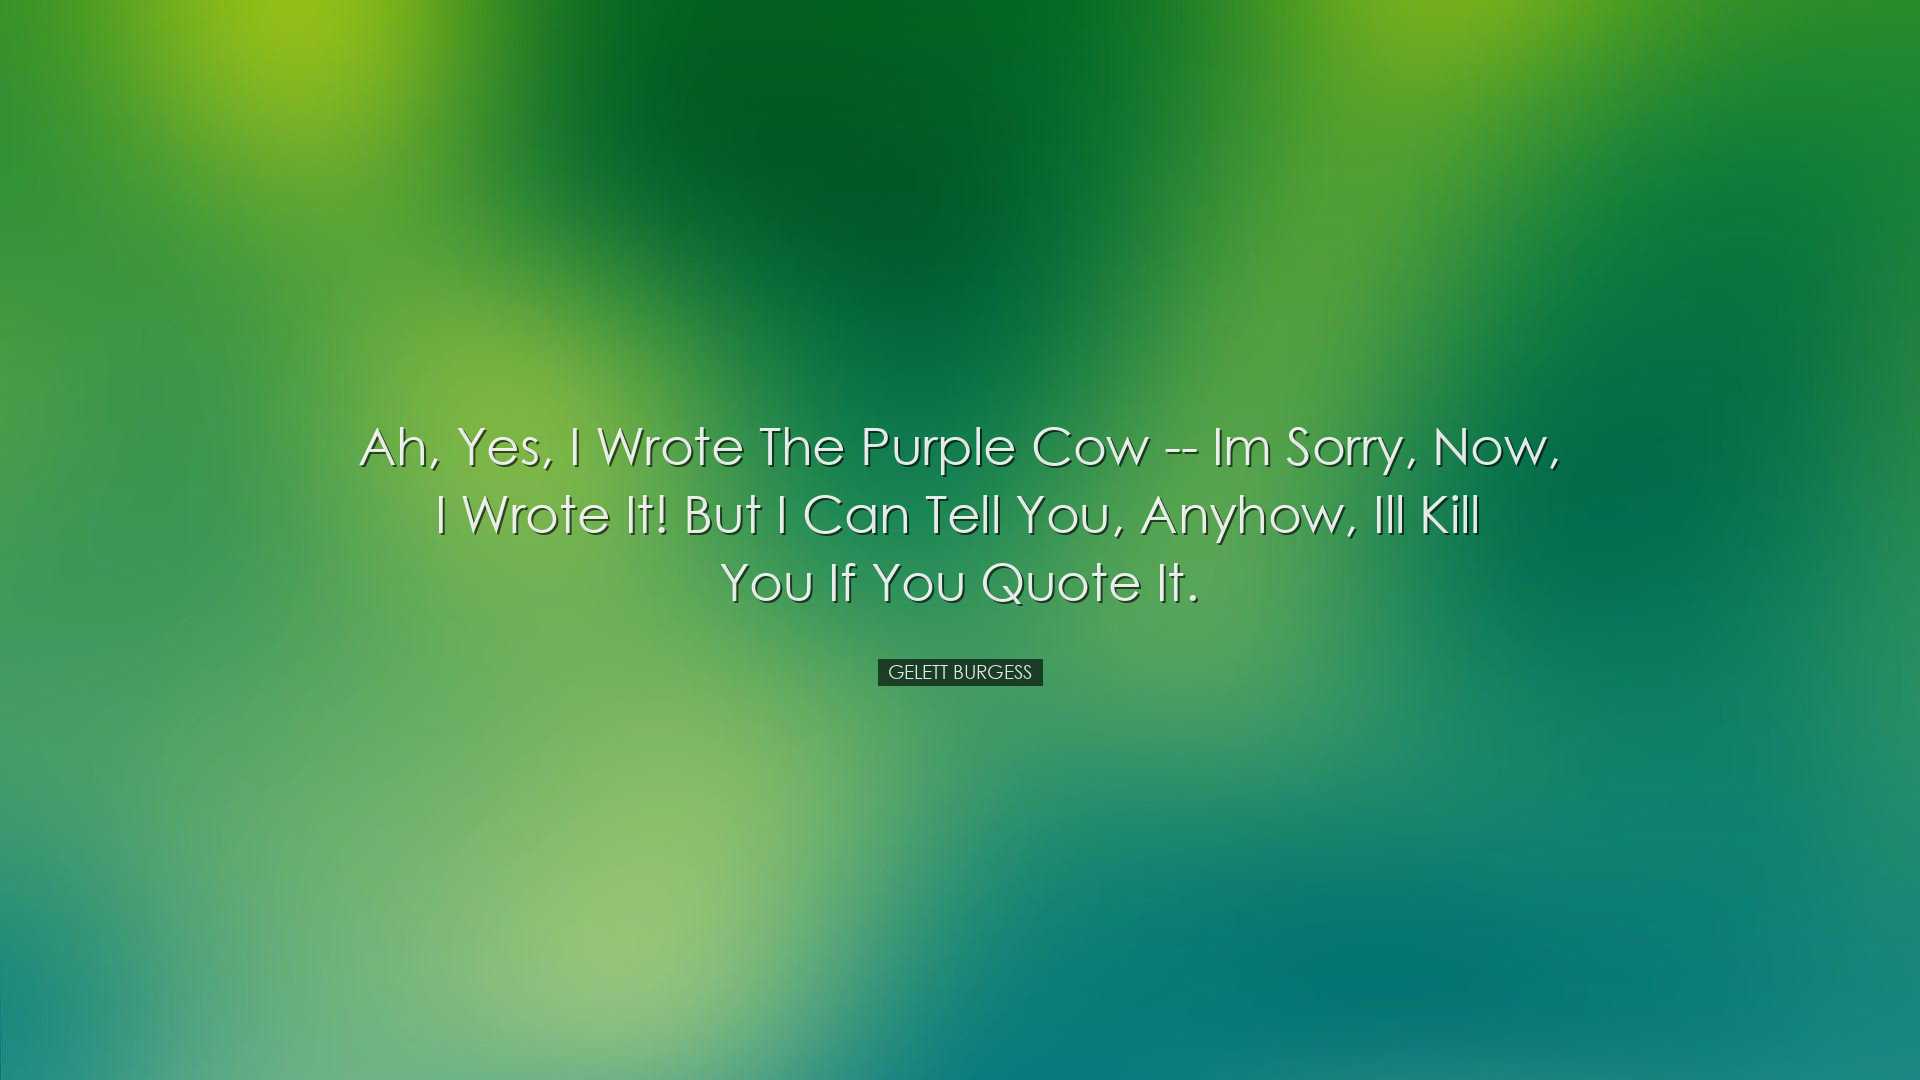 Ah, yes, I wrote the Purple Cow -- Im sorry, now, I wrote it! But